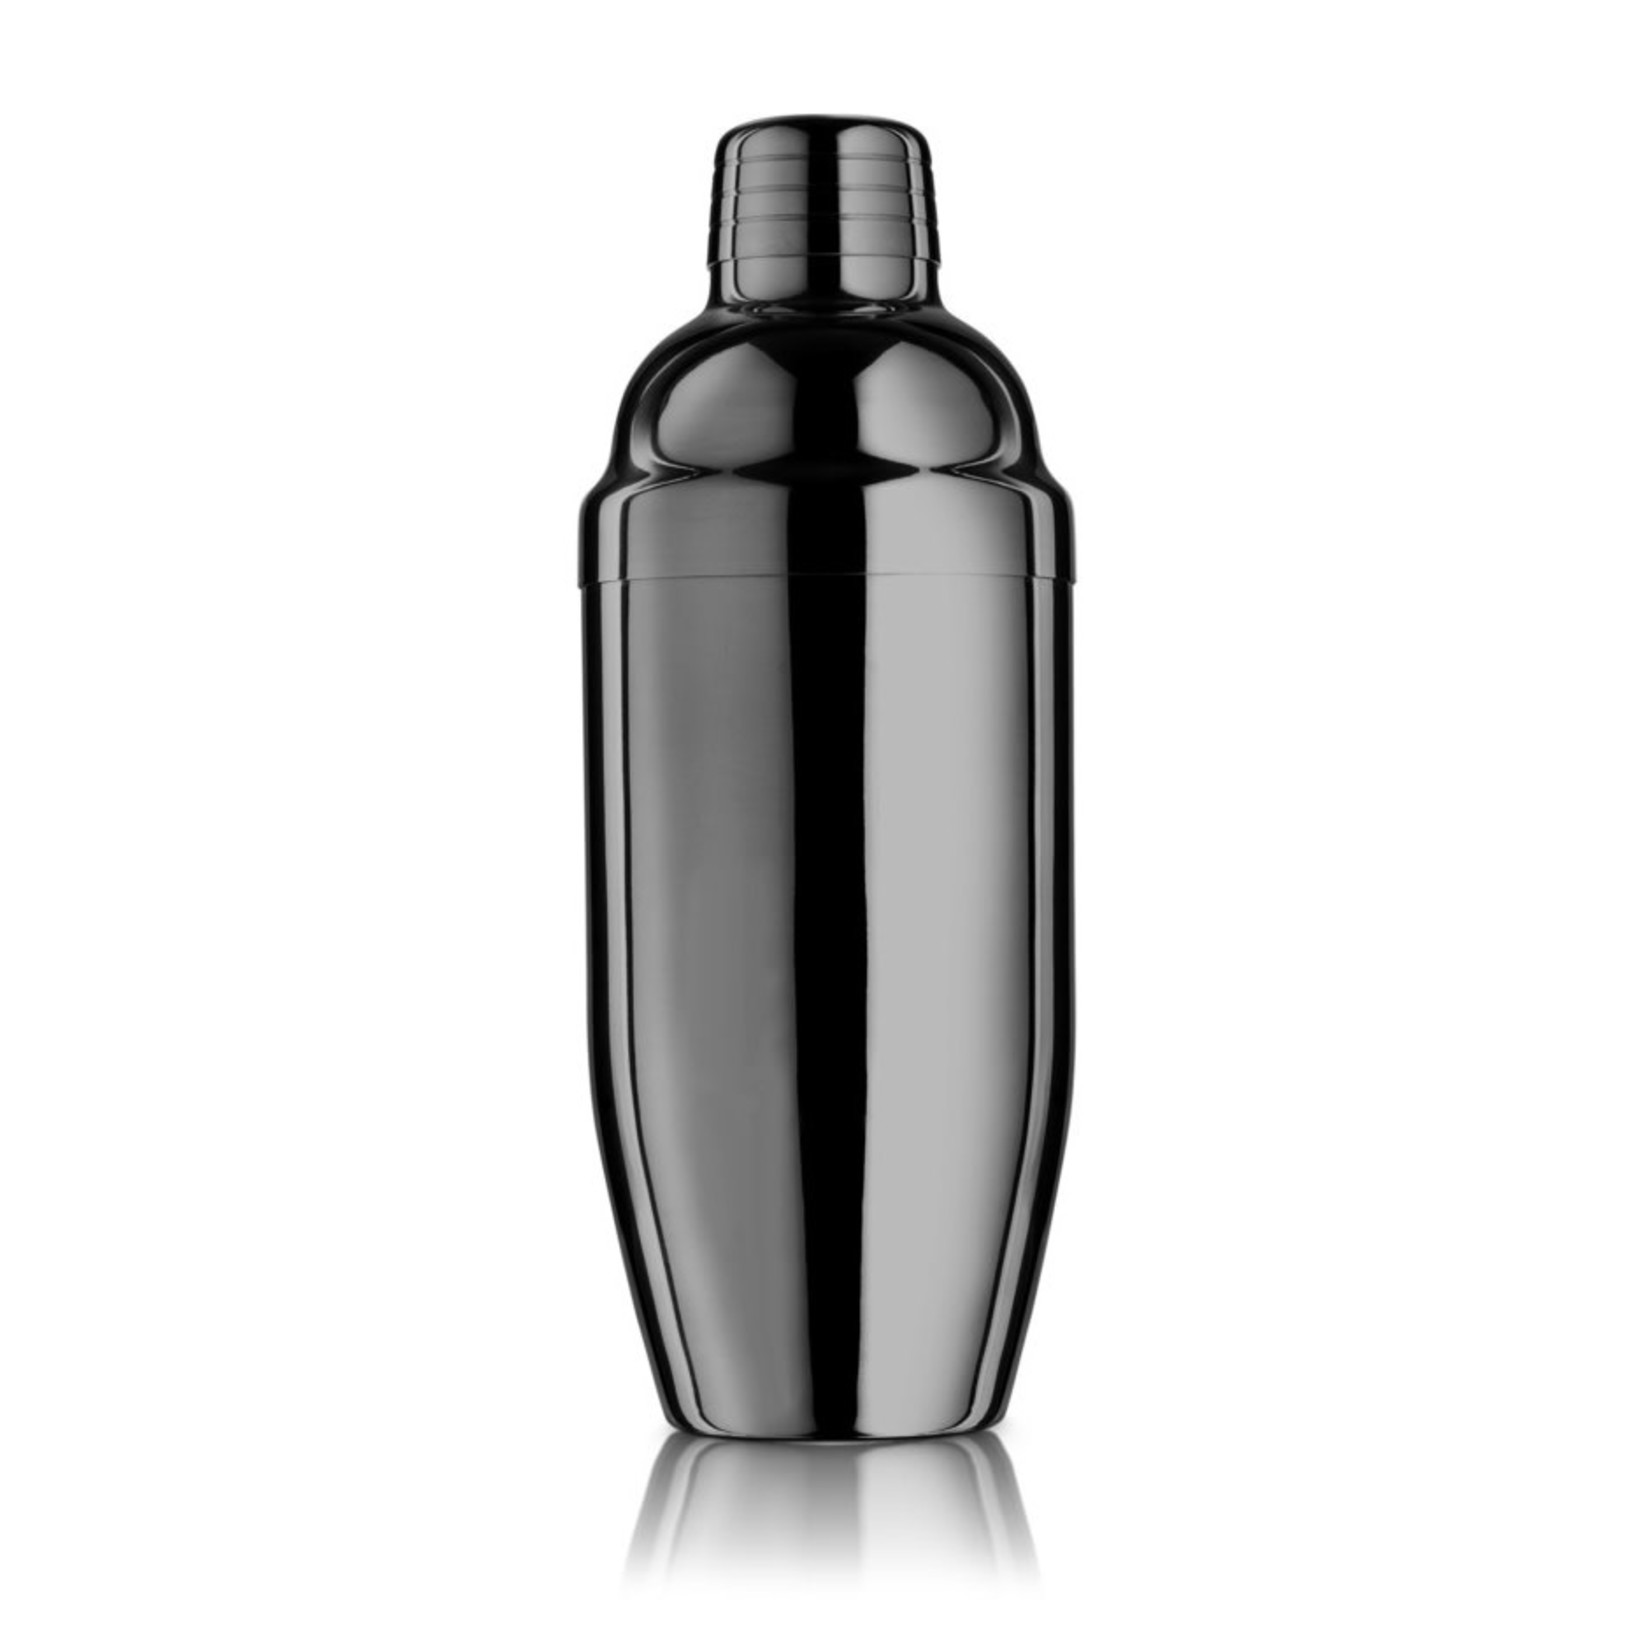 FINAL TOUCH FINAL TOUCH Martini Double Wall Stainless Steel Shaker - Black Chrome